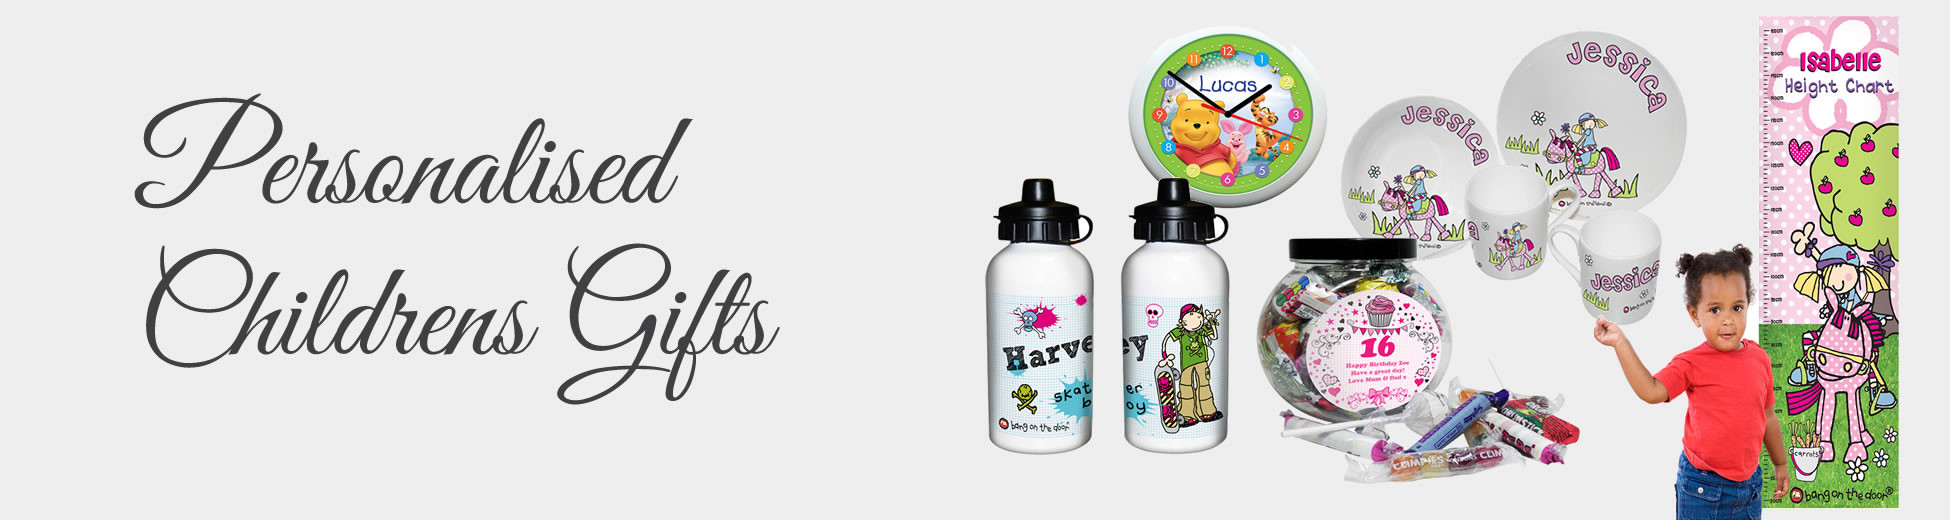 Personalised Children Gifts
 Personalised Gifts For Kids